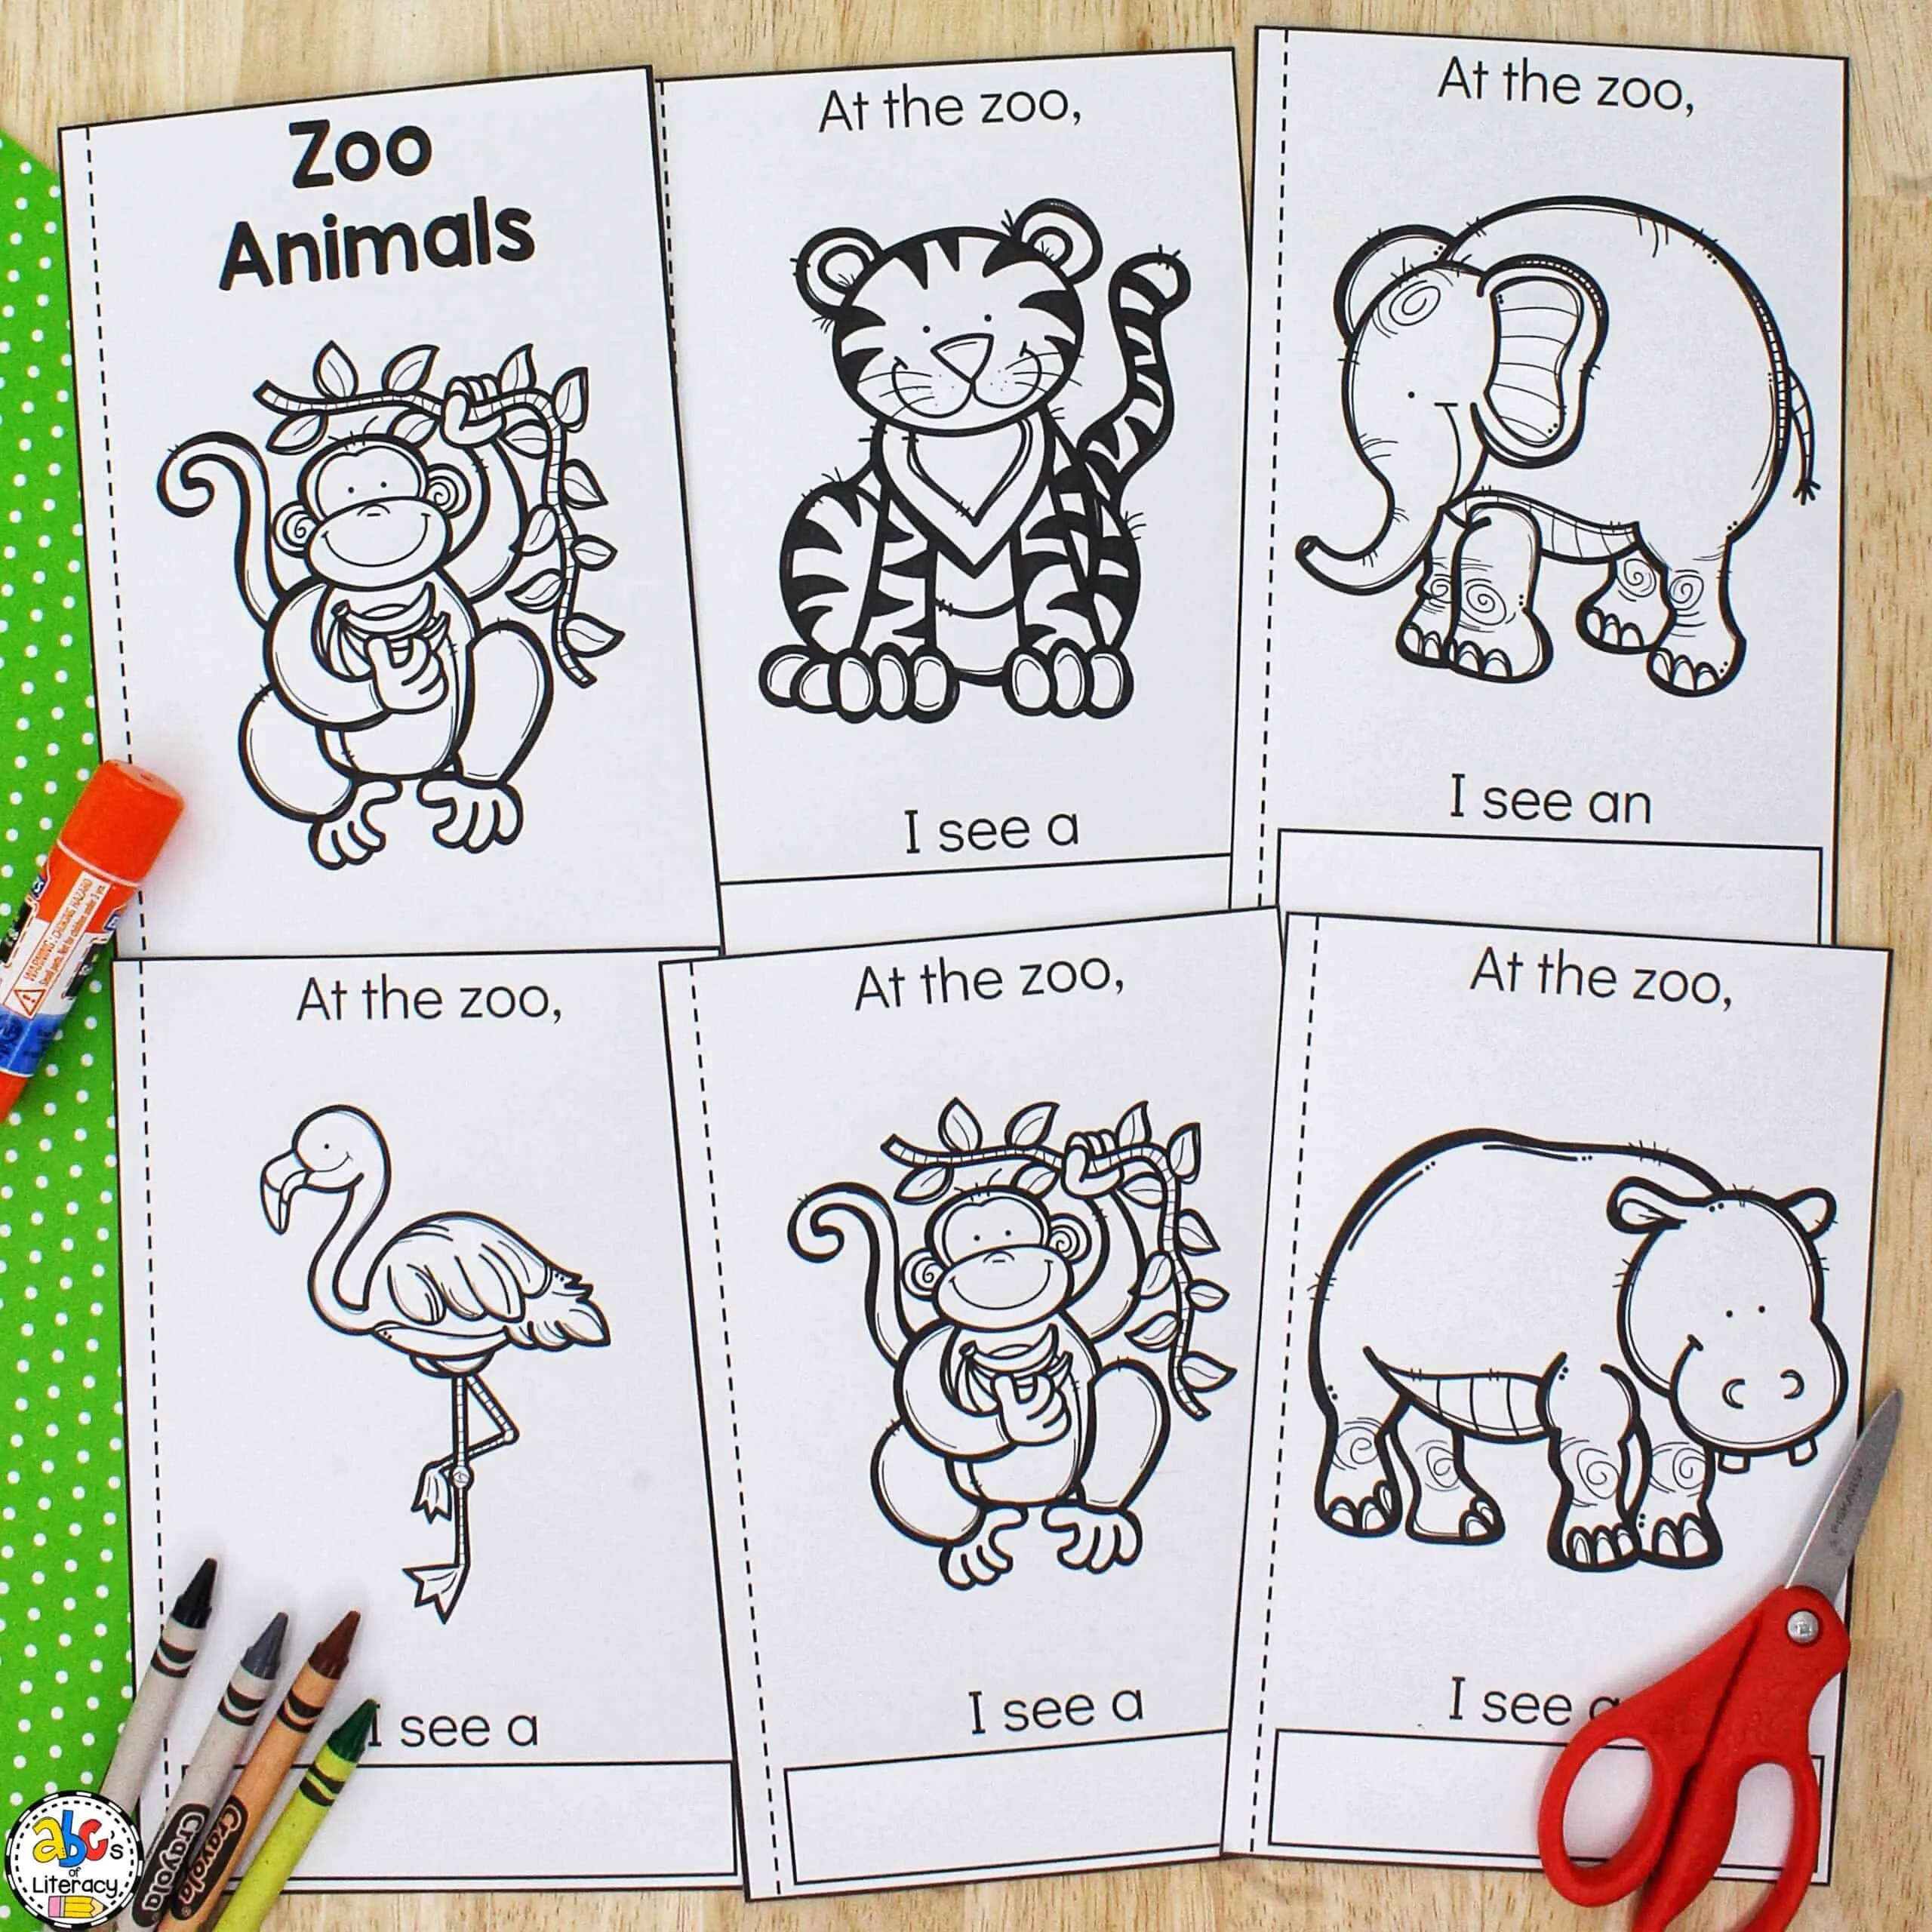 Zoo animals cut paste book printable book for kids